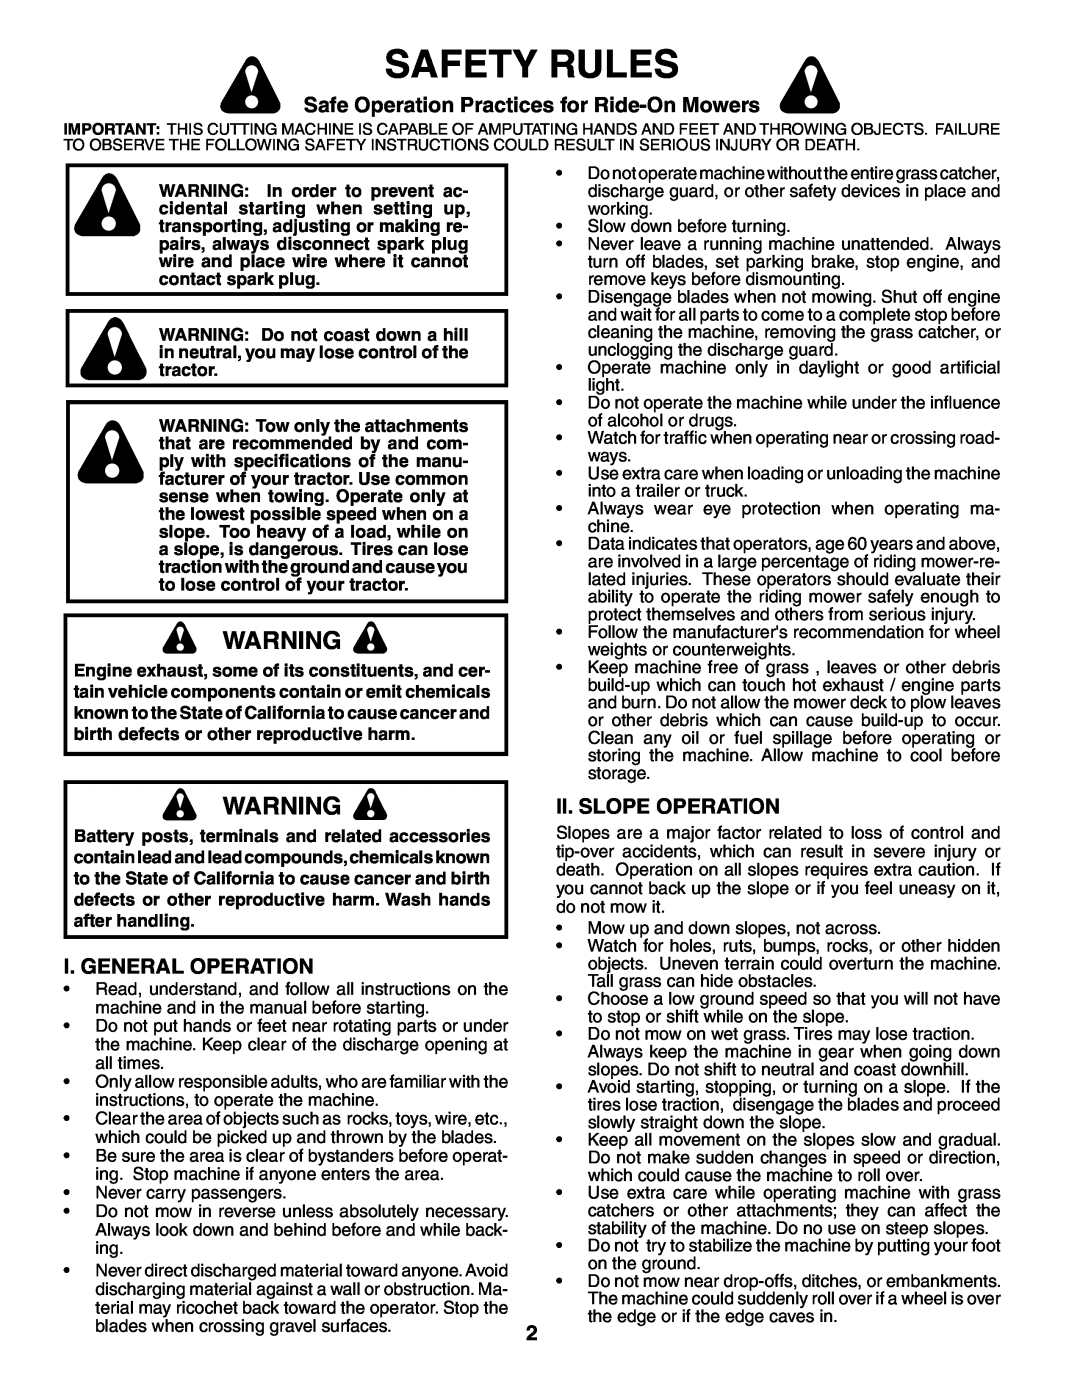 Husqvarna LTH1542 Safety Rules, Safe Operation Practices for Ride-On Mowers, I. General Operation, Ii. Slope Operation 